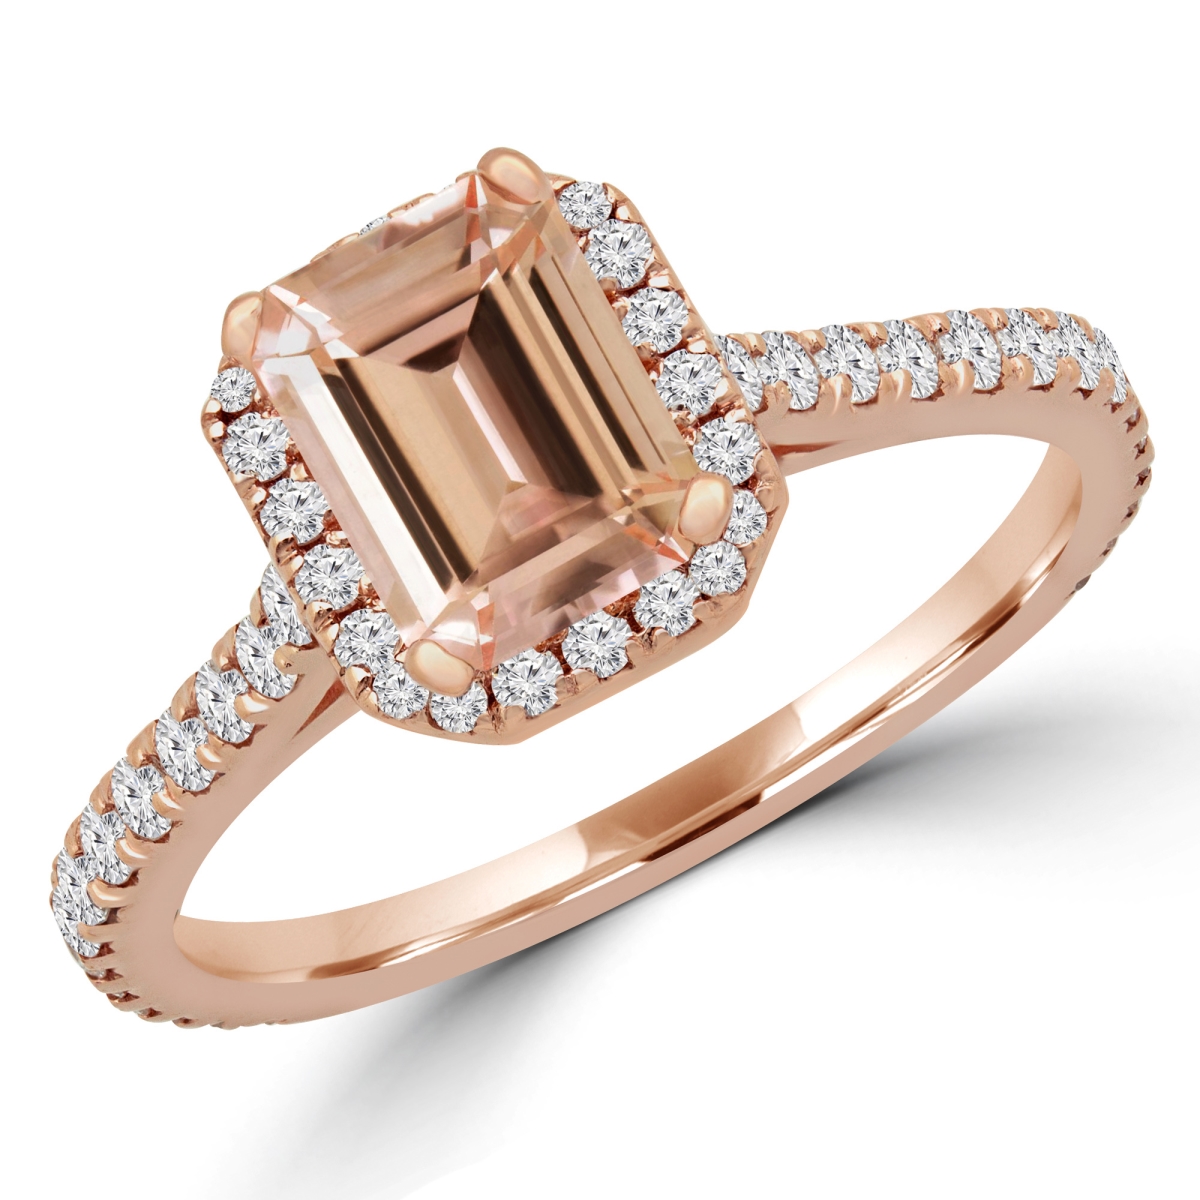 Picture of Majesty Diamonds MD180580-4.25 1.25 CTW Emerald Pink Morganite Halo Engagement Ring in 14K Rose Gold - Size 4.25